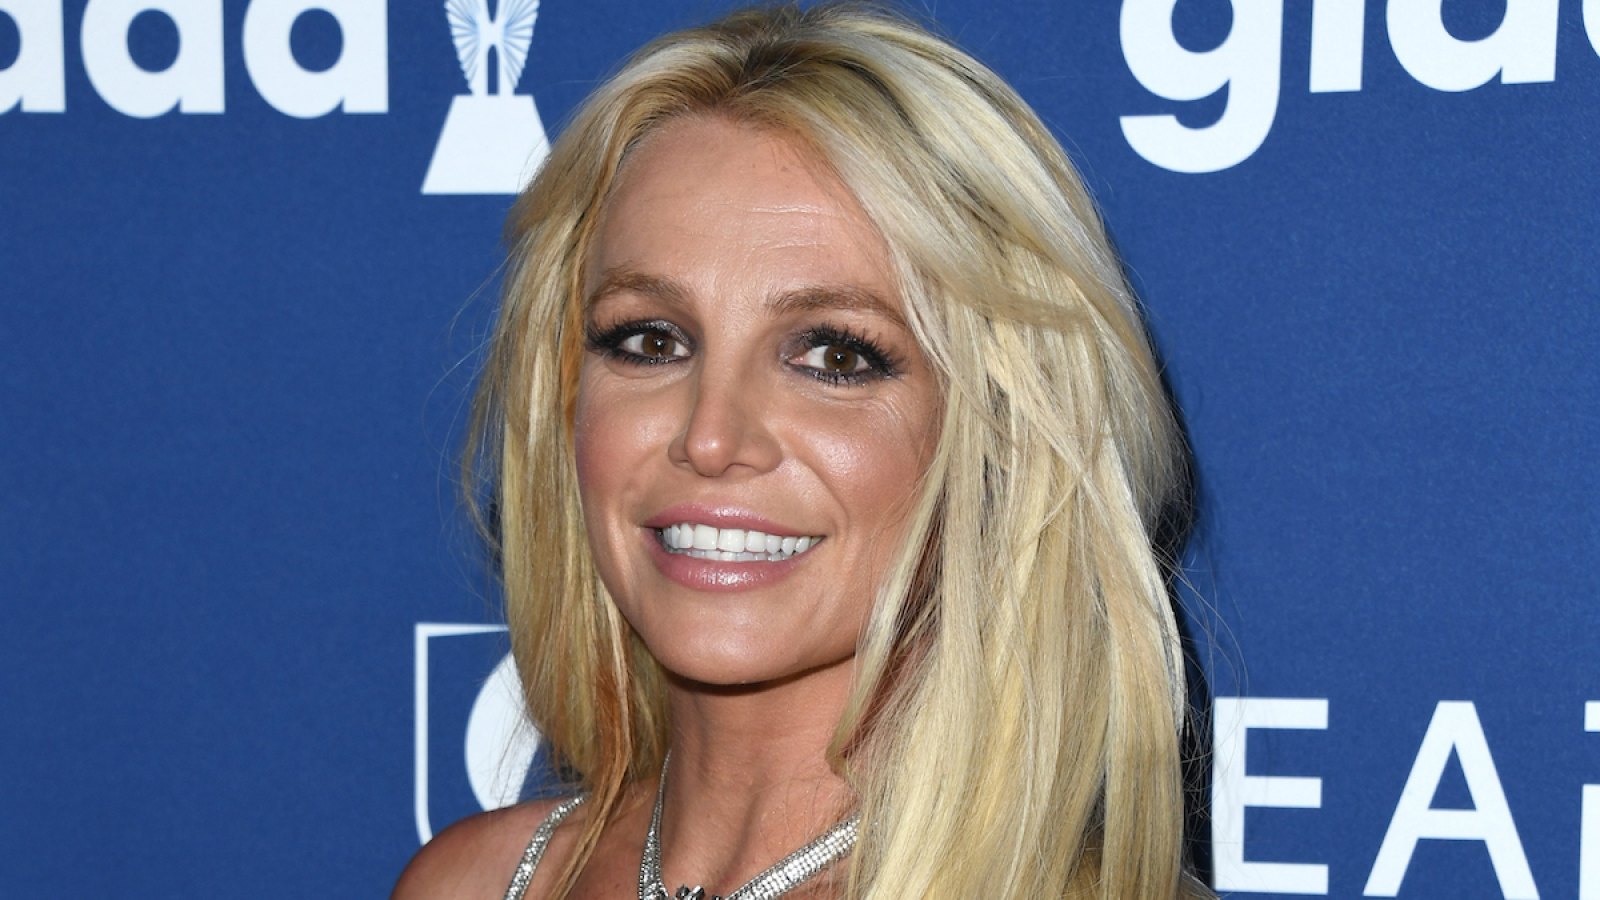 Britney Spears Shows Off Killer Bikini Body As She Does Yoga After Treatment